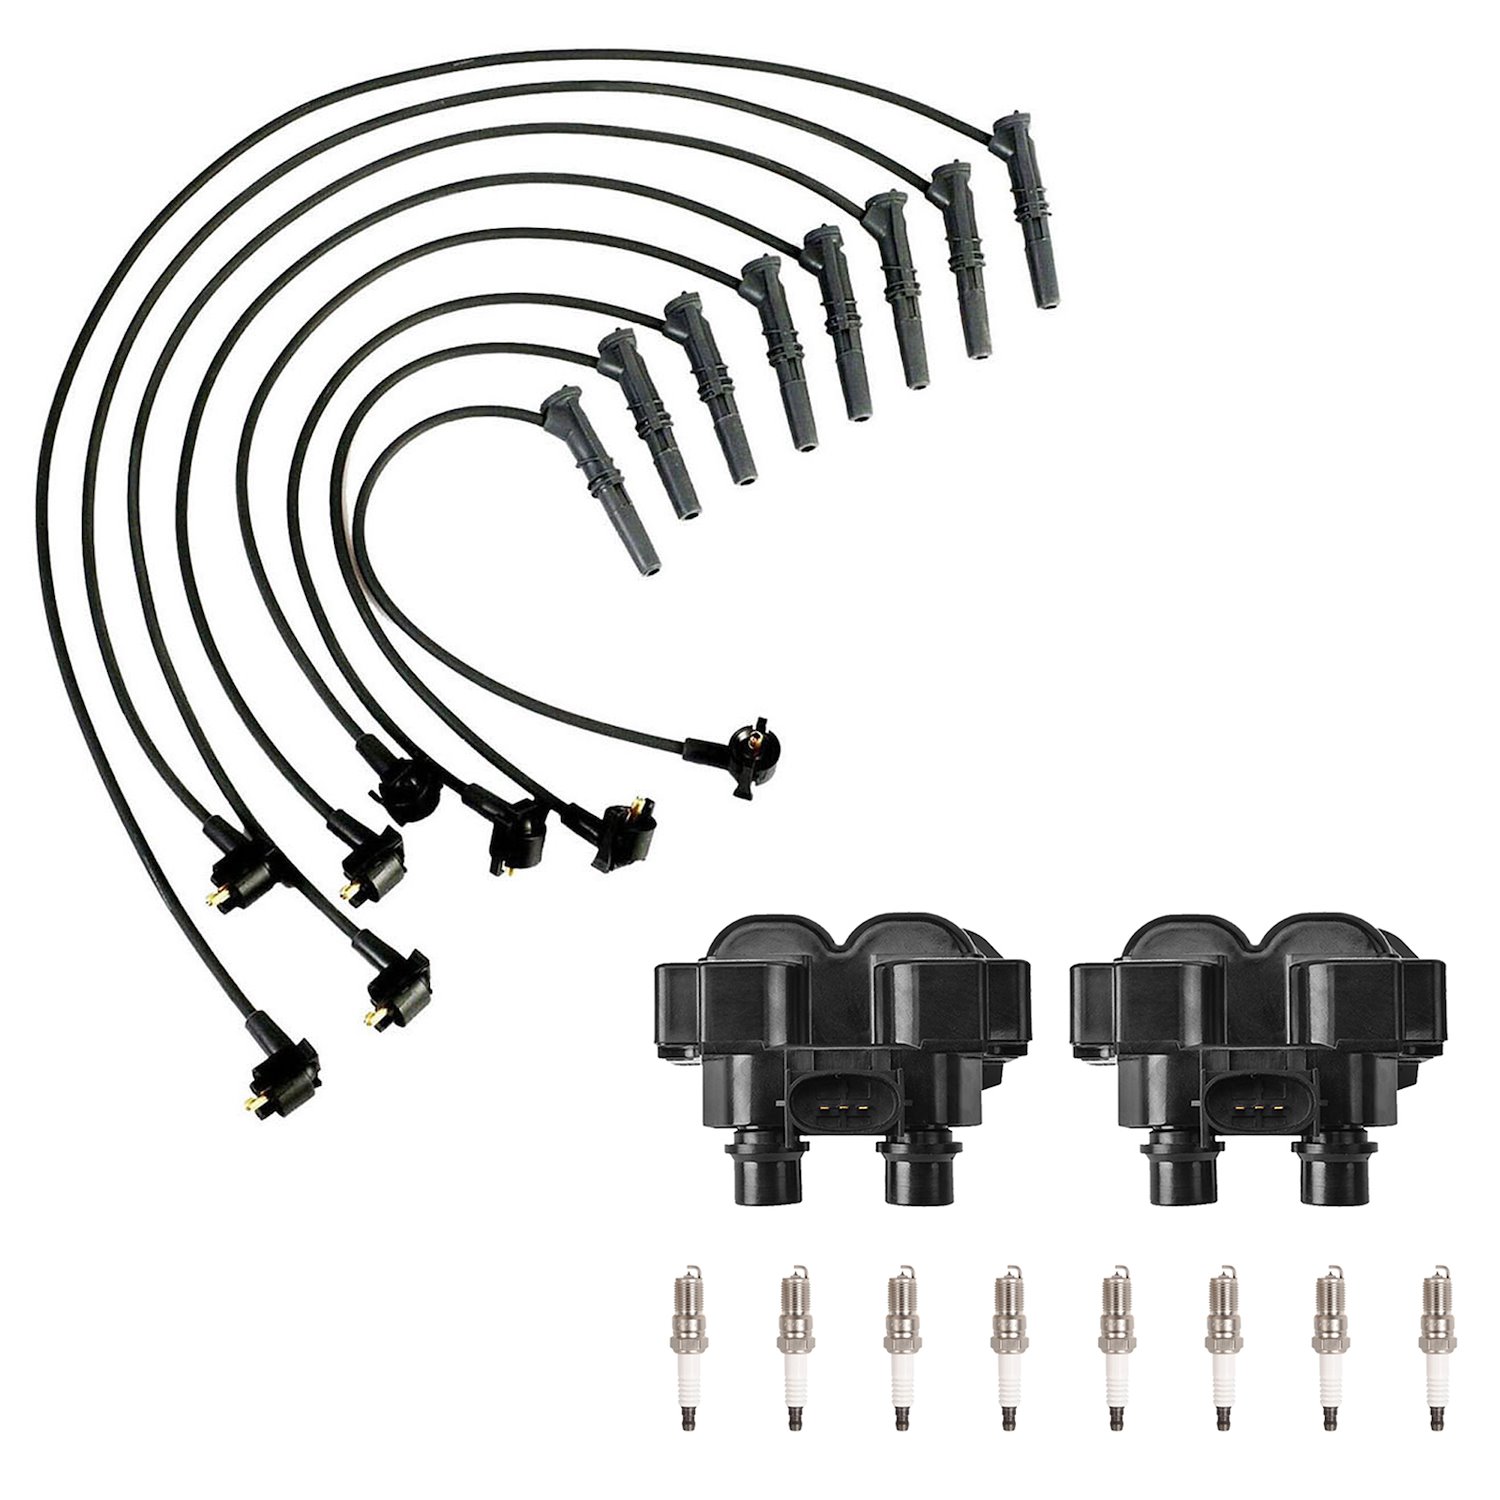 OE Replacement Ignition Coil, Spark Plug, and Spark Plug Wire Kit, Ford F-150/F-250, Lincoln Mercury